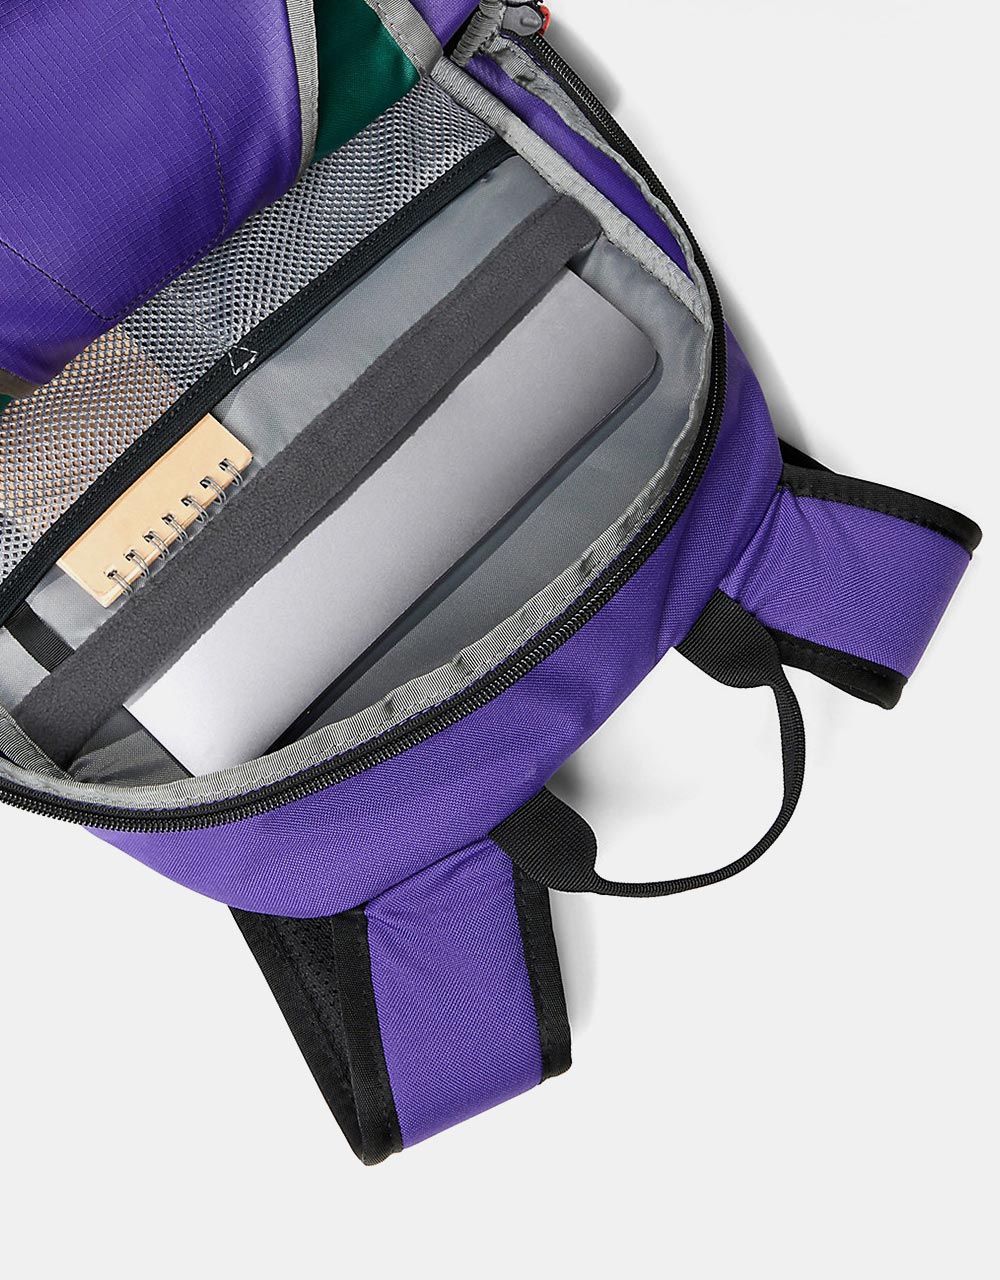 The North Face Y2K Daypack - TNF Purple/TNF Green